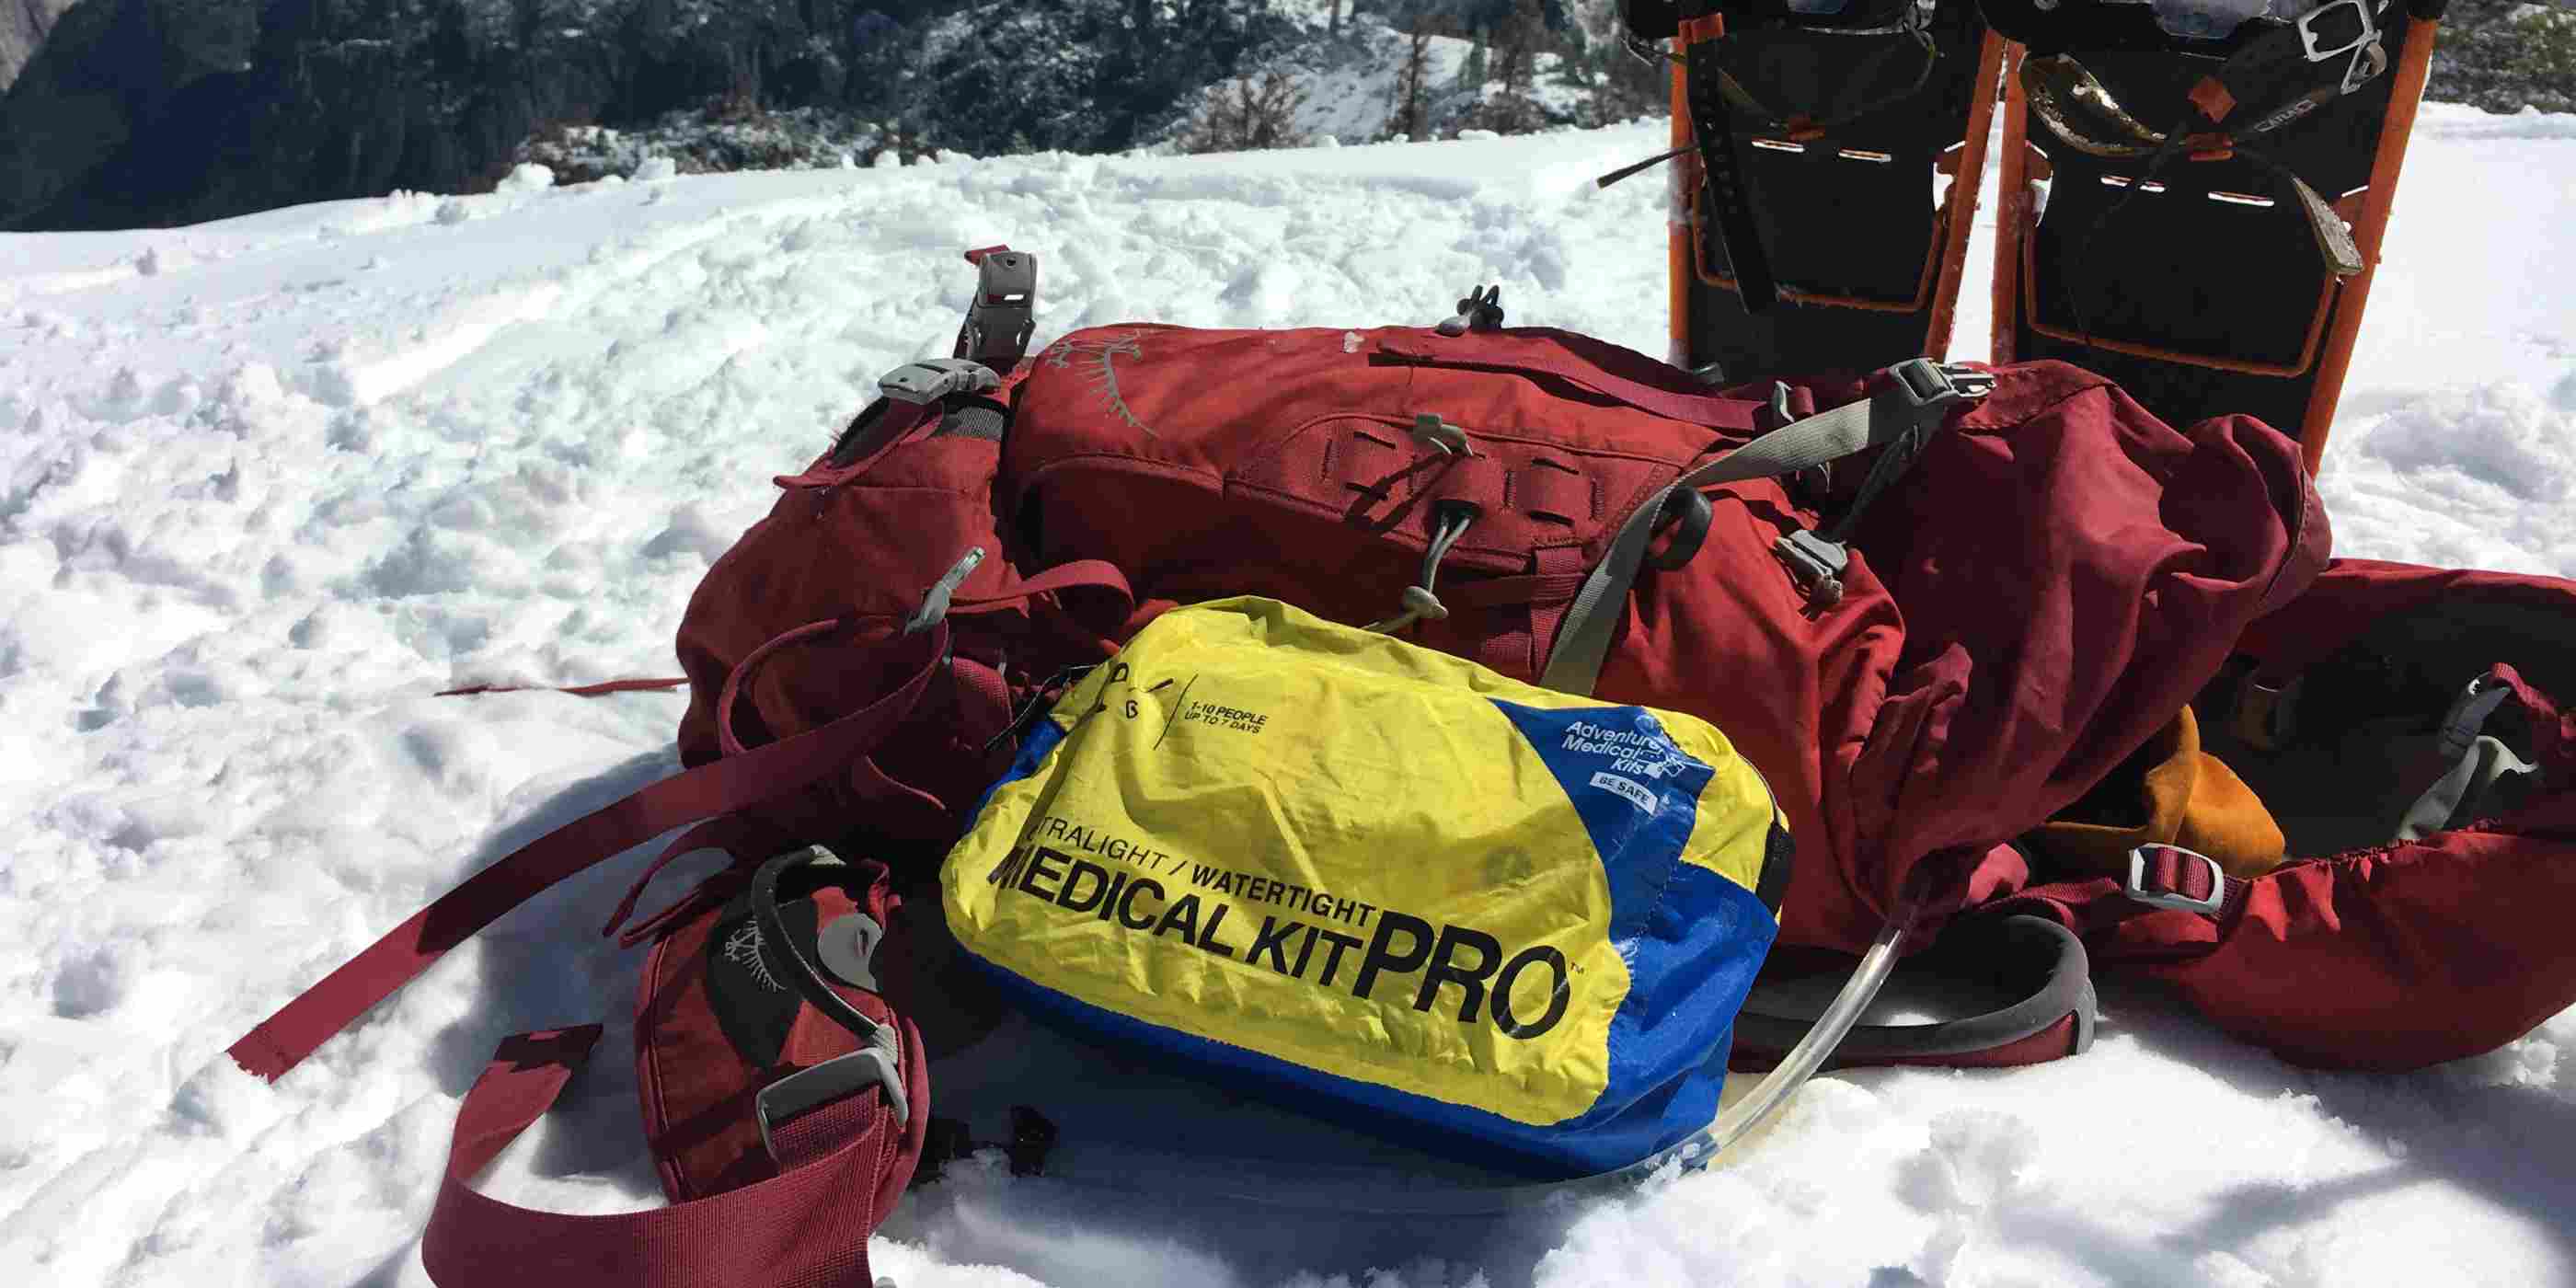 Ultralight/Watertight Medical Kit - Pro next to backpack and snowshoes in the snow